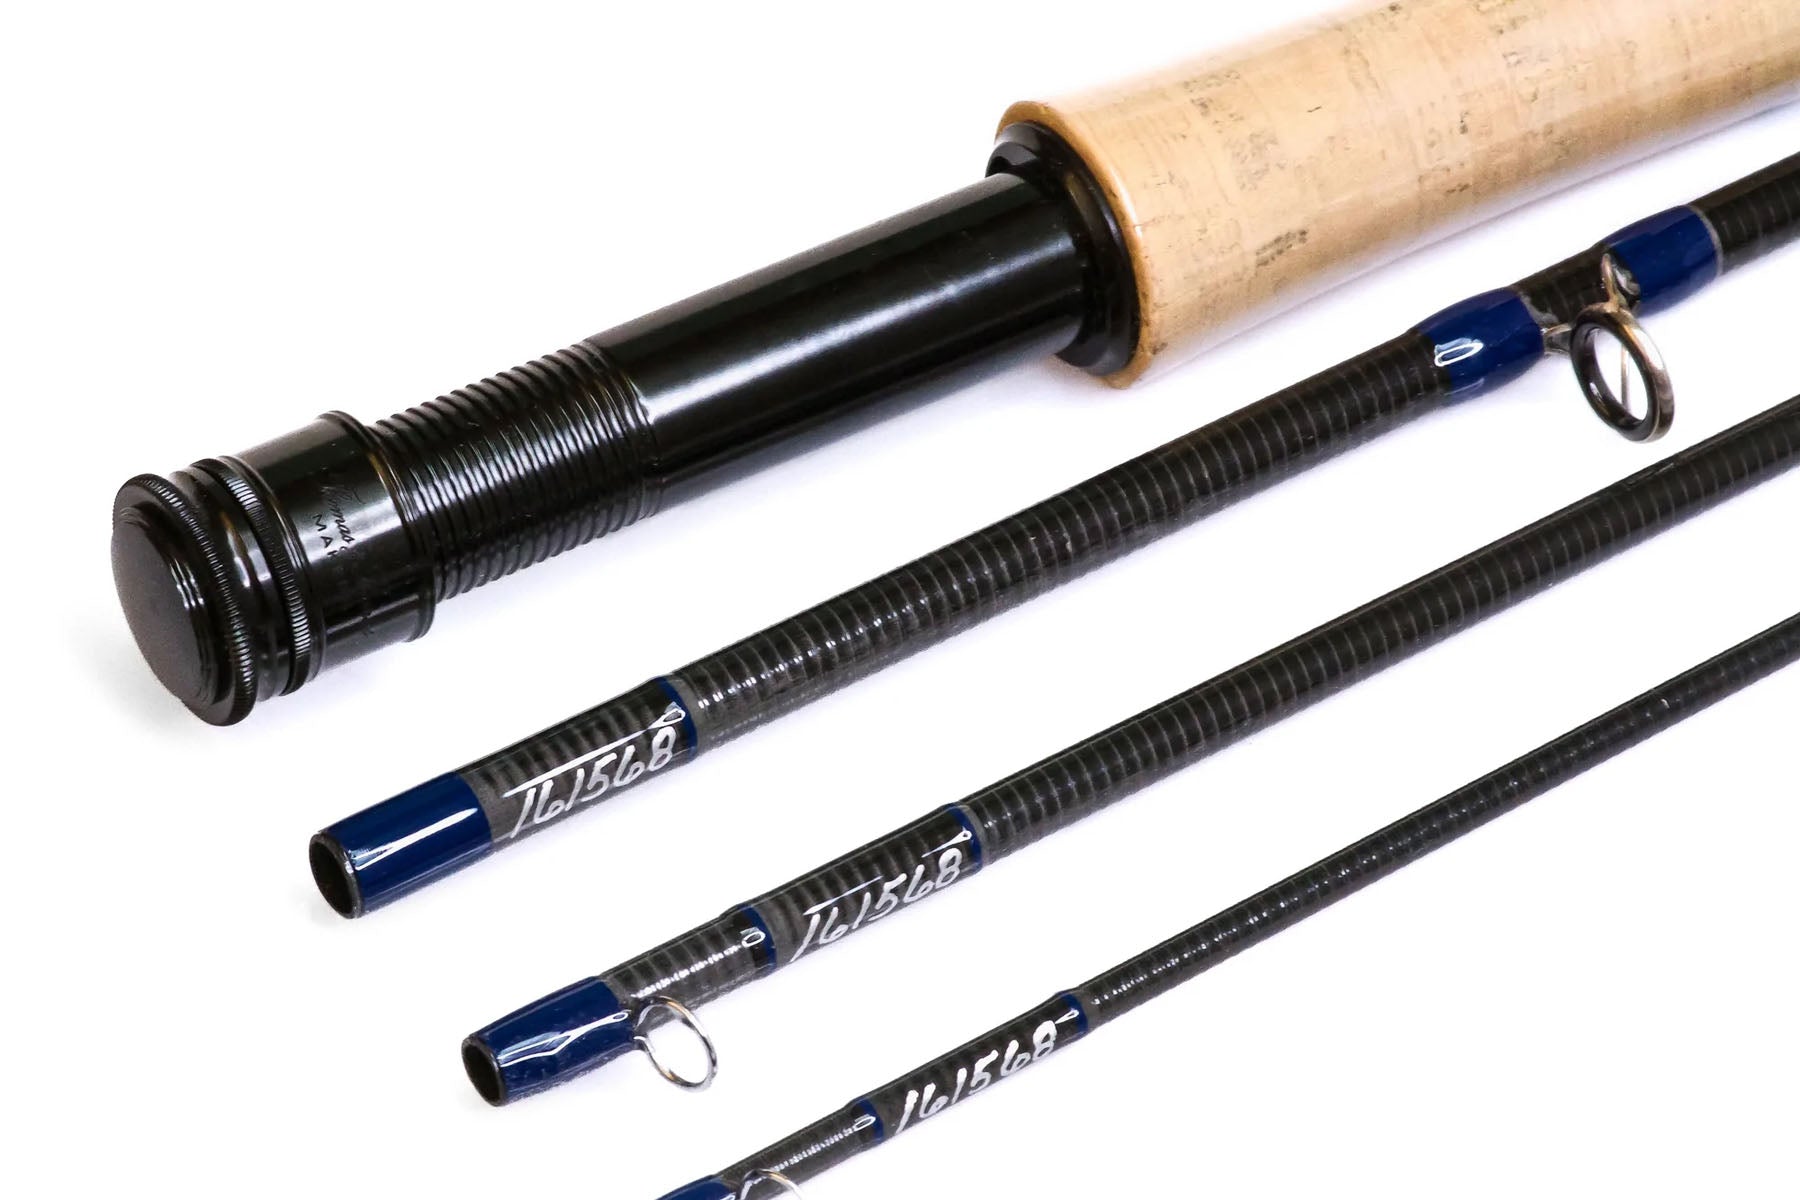 Thomas & Thomas Exocett Surf Two-Handed Fly Rods